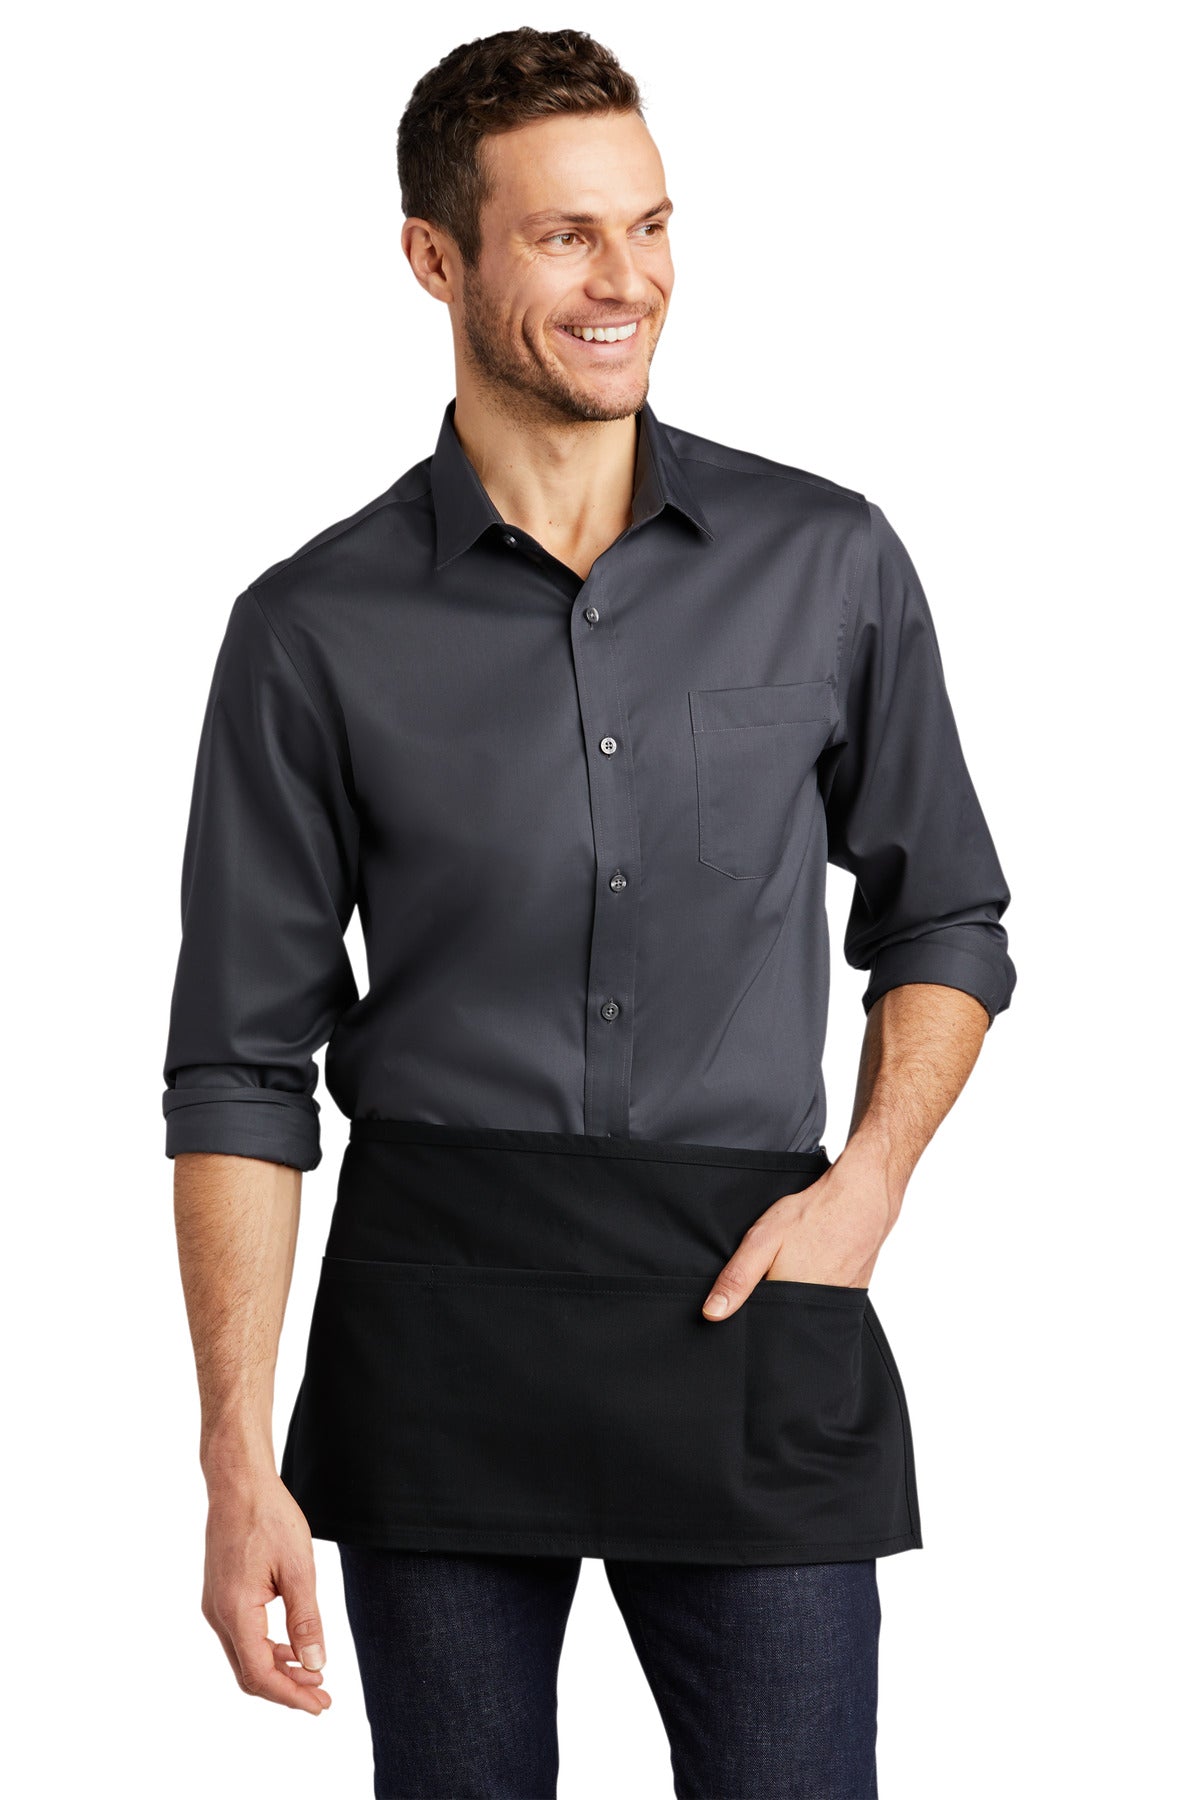 Port Authority® Easy Care Reversible Waist Apron with Stain Release. A707 - DFW Impression